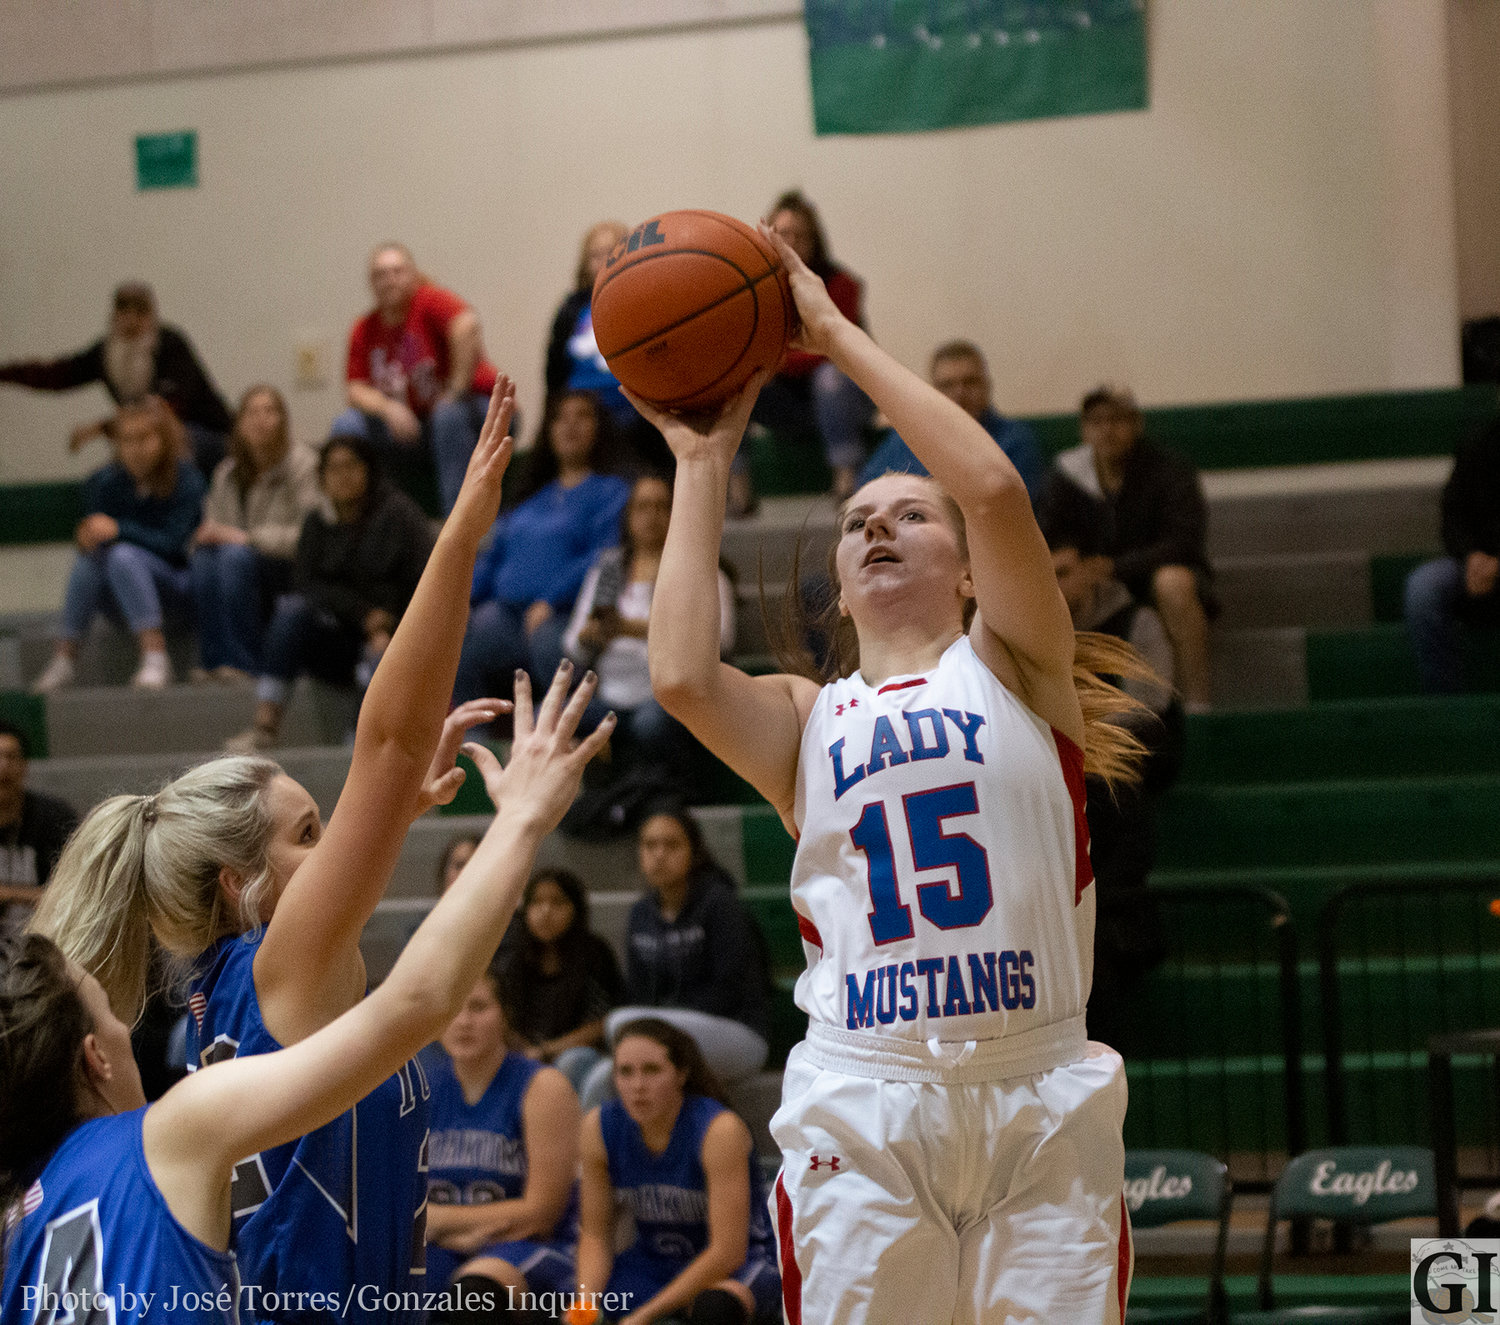 Faith Pullin (15) led the team in scoring with 23 points as Nixon-Smiley knocked off Yoakum 50-34 to take sole possession of fourth place in their tiebreaking game on Friday in Luling.